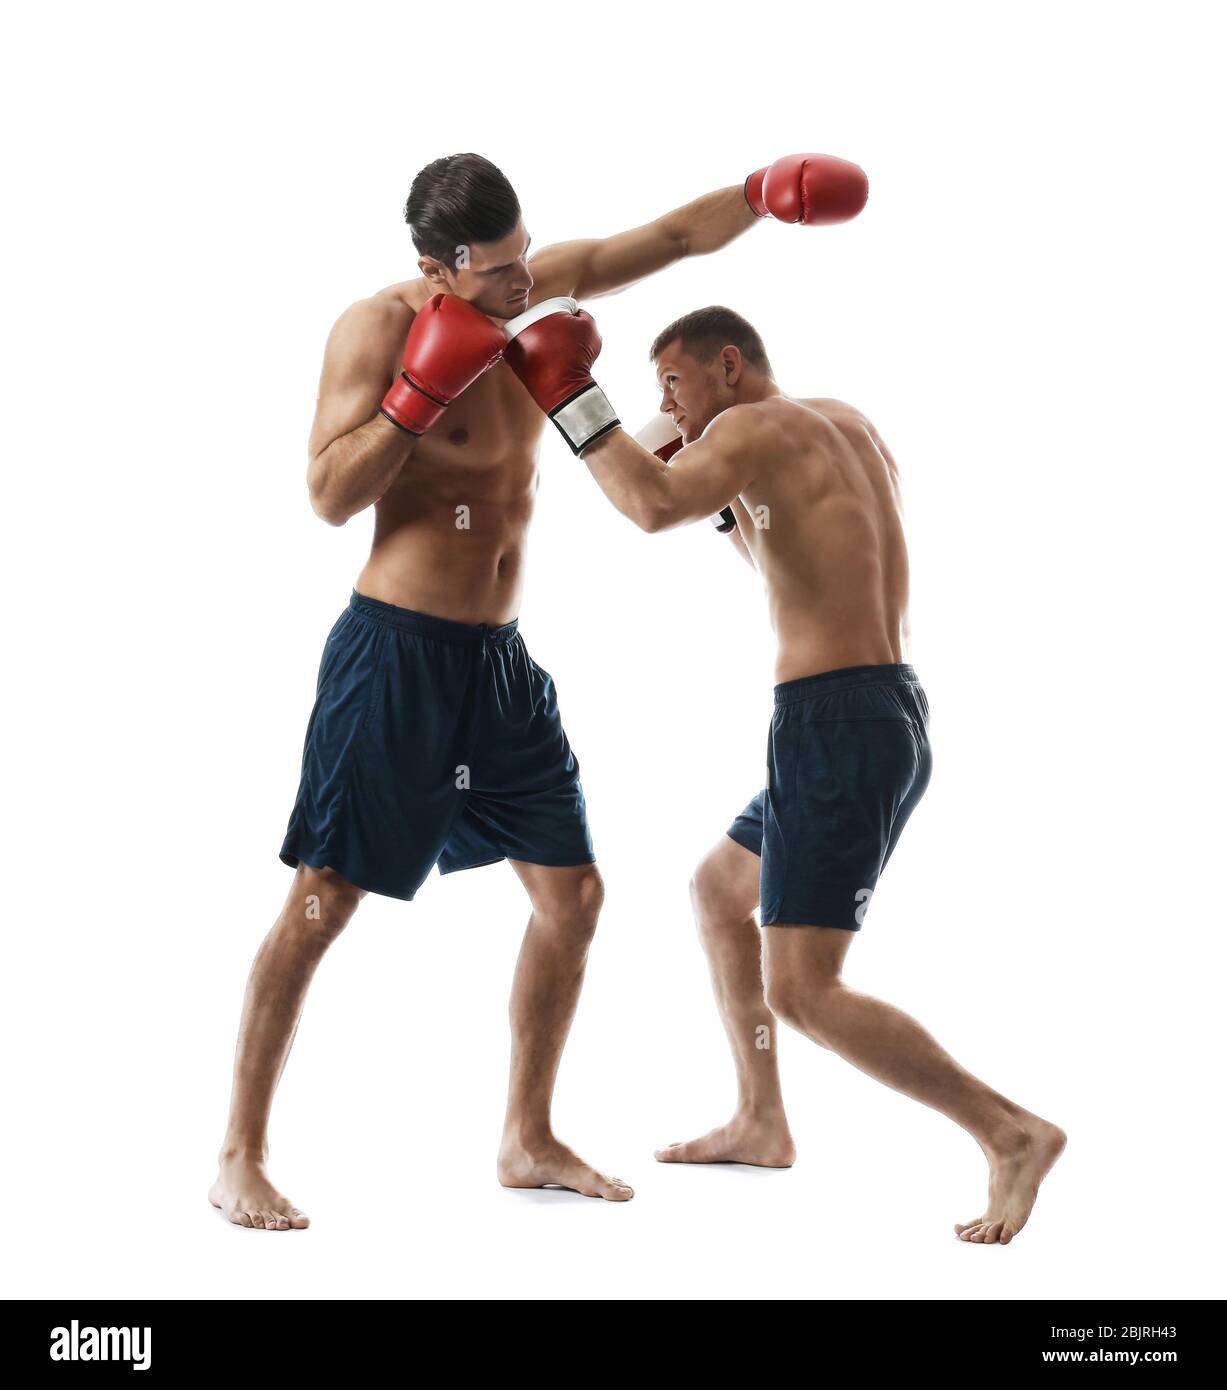 Attractive young boxers fighting on white background Stock Photo